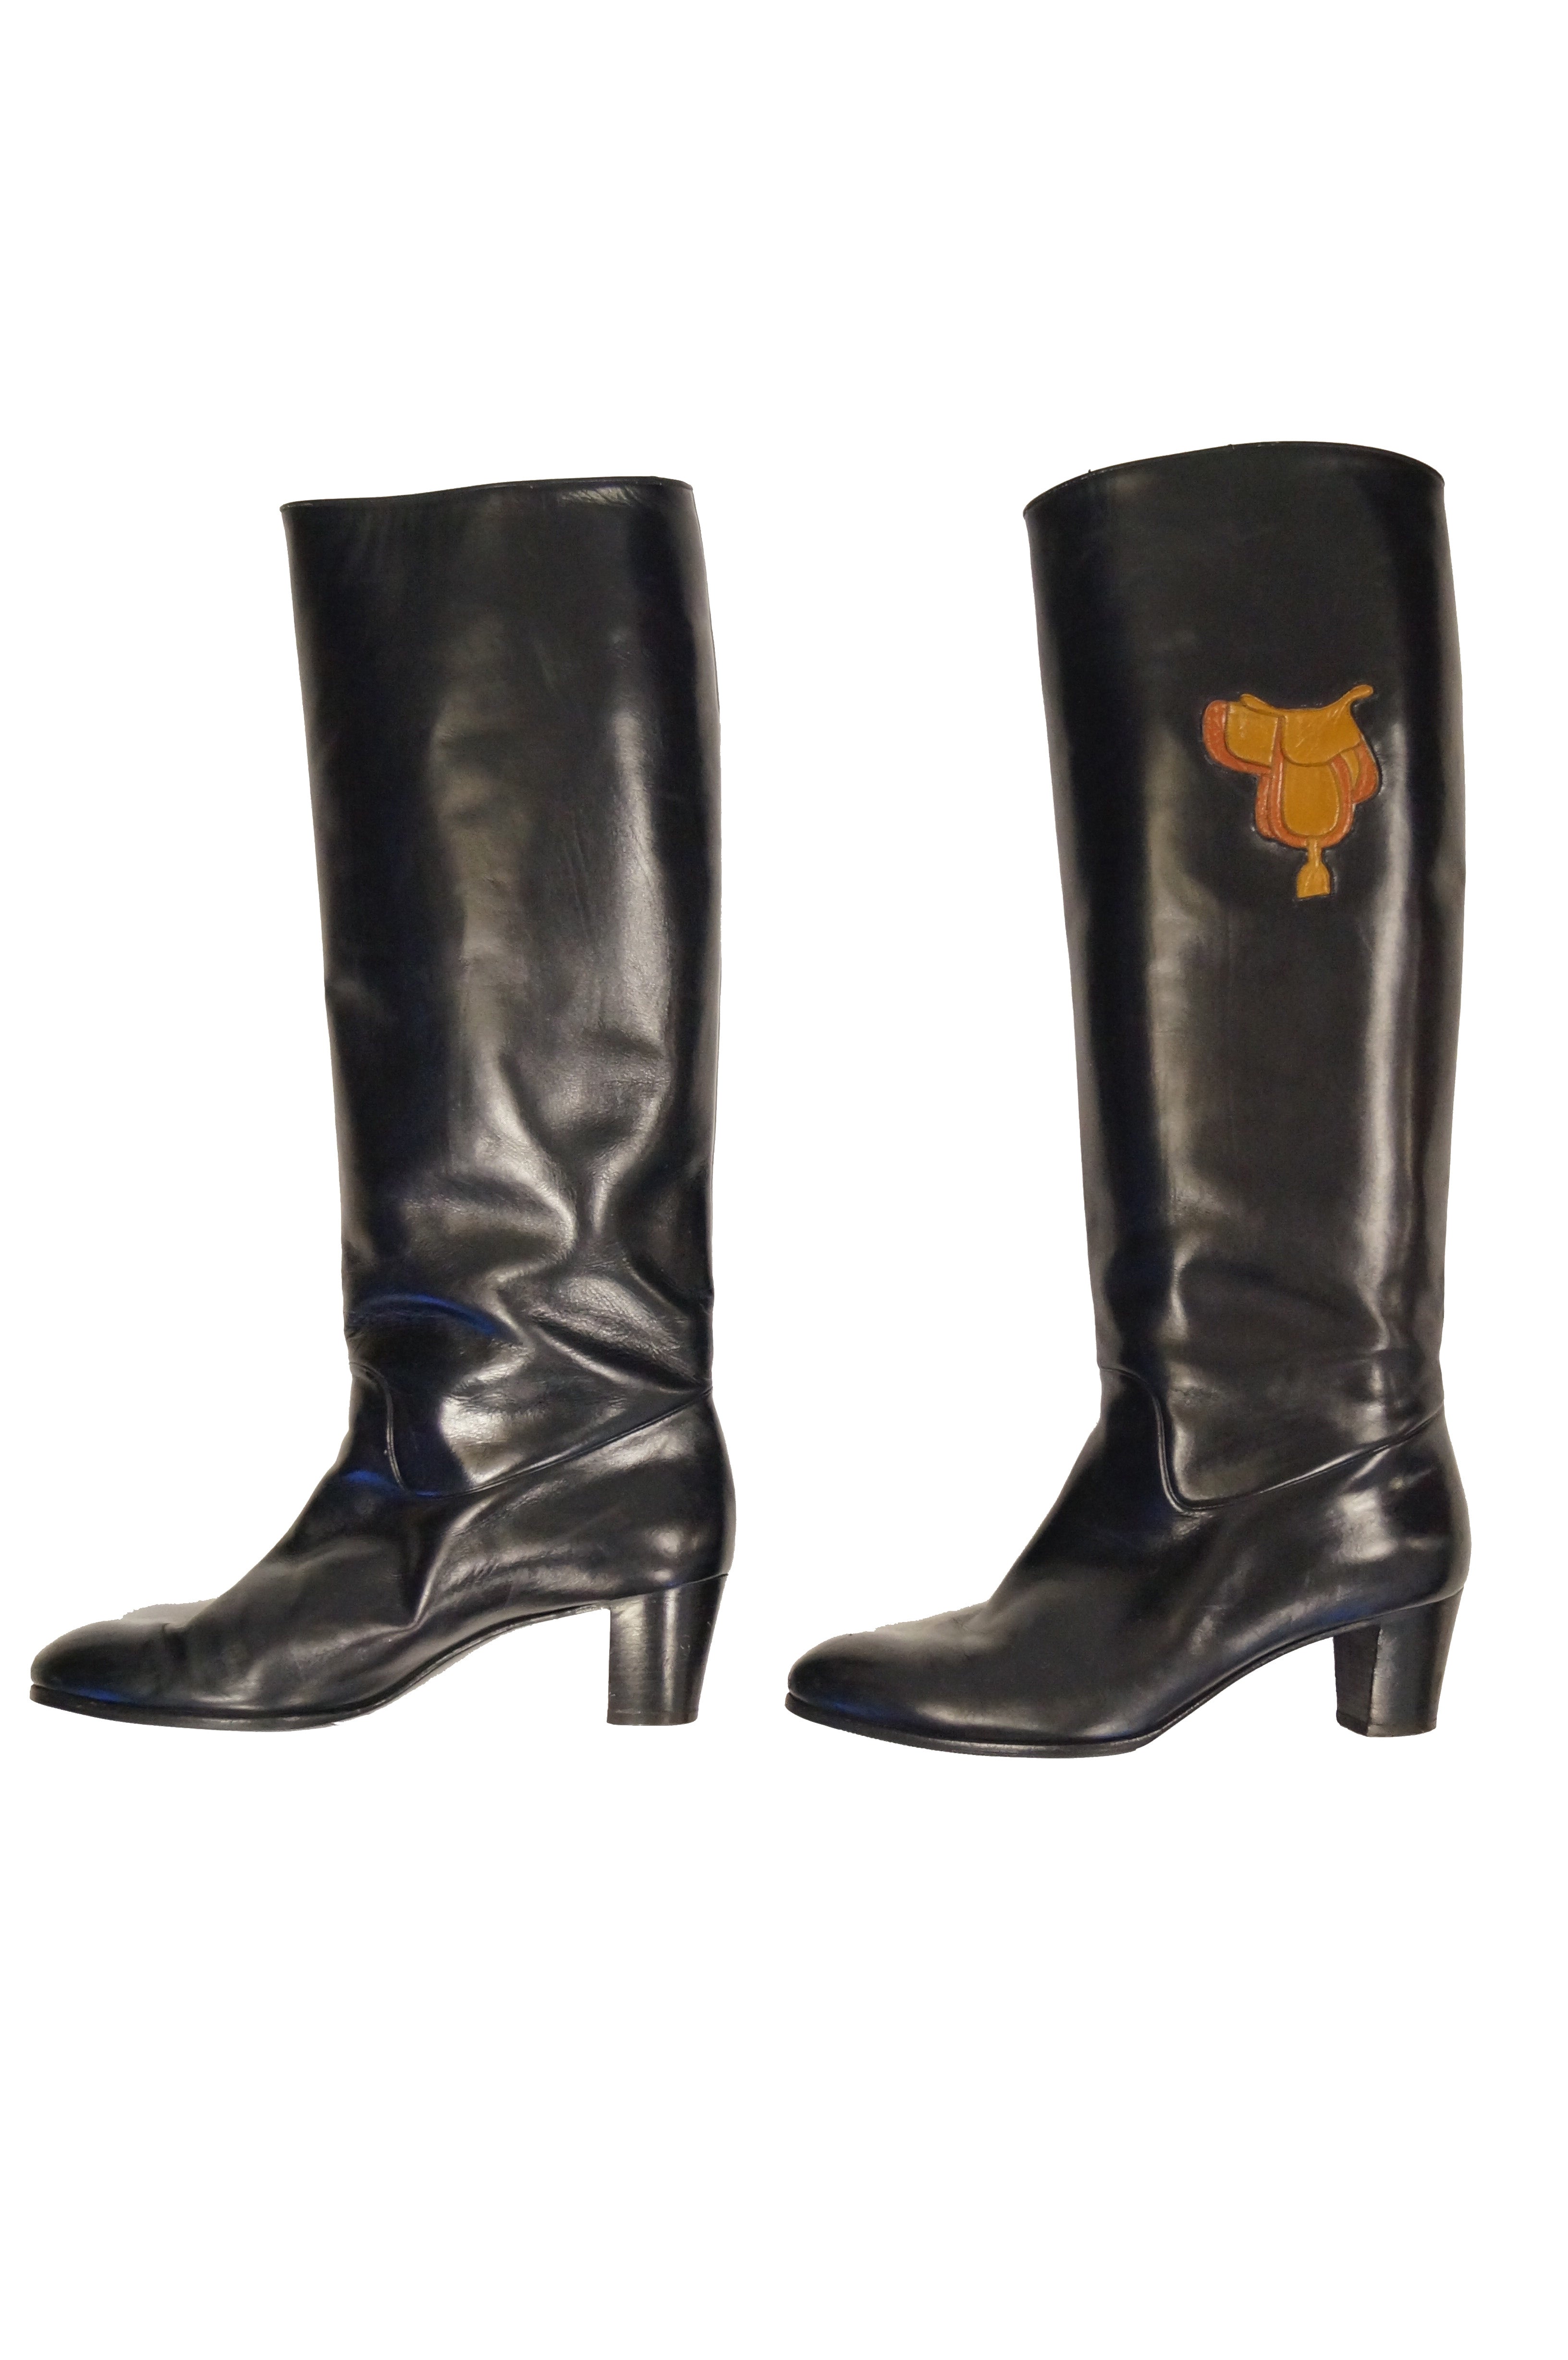 1980s Gucci Mahogany Leather Saddle Applique Boots - MRS Couture